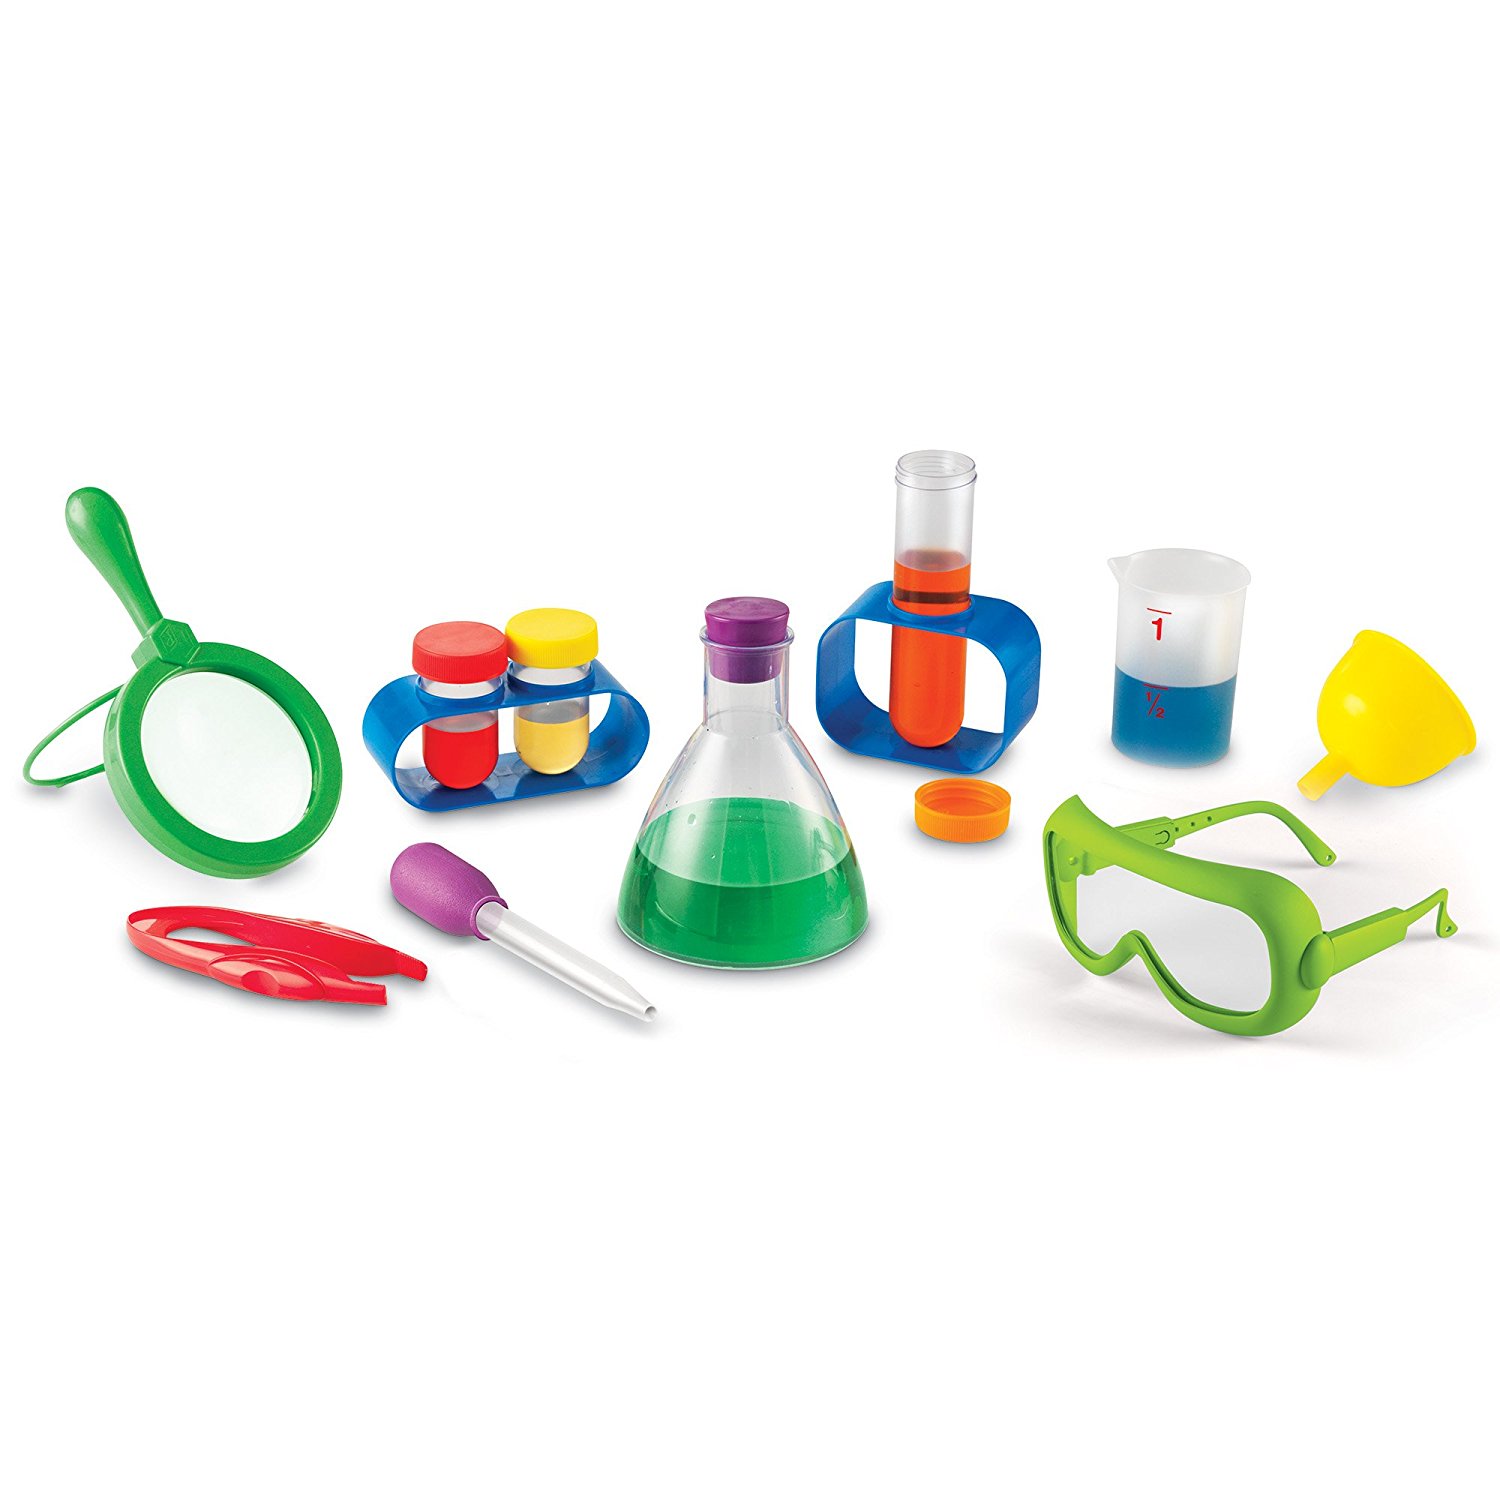 stem toys for elementary students